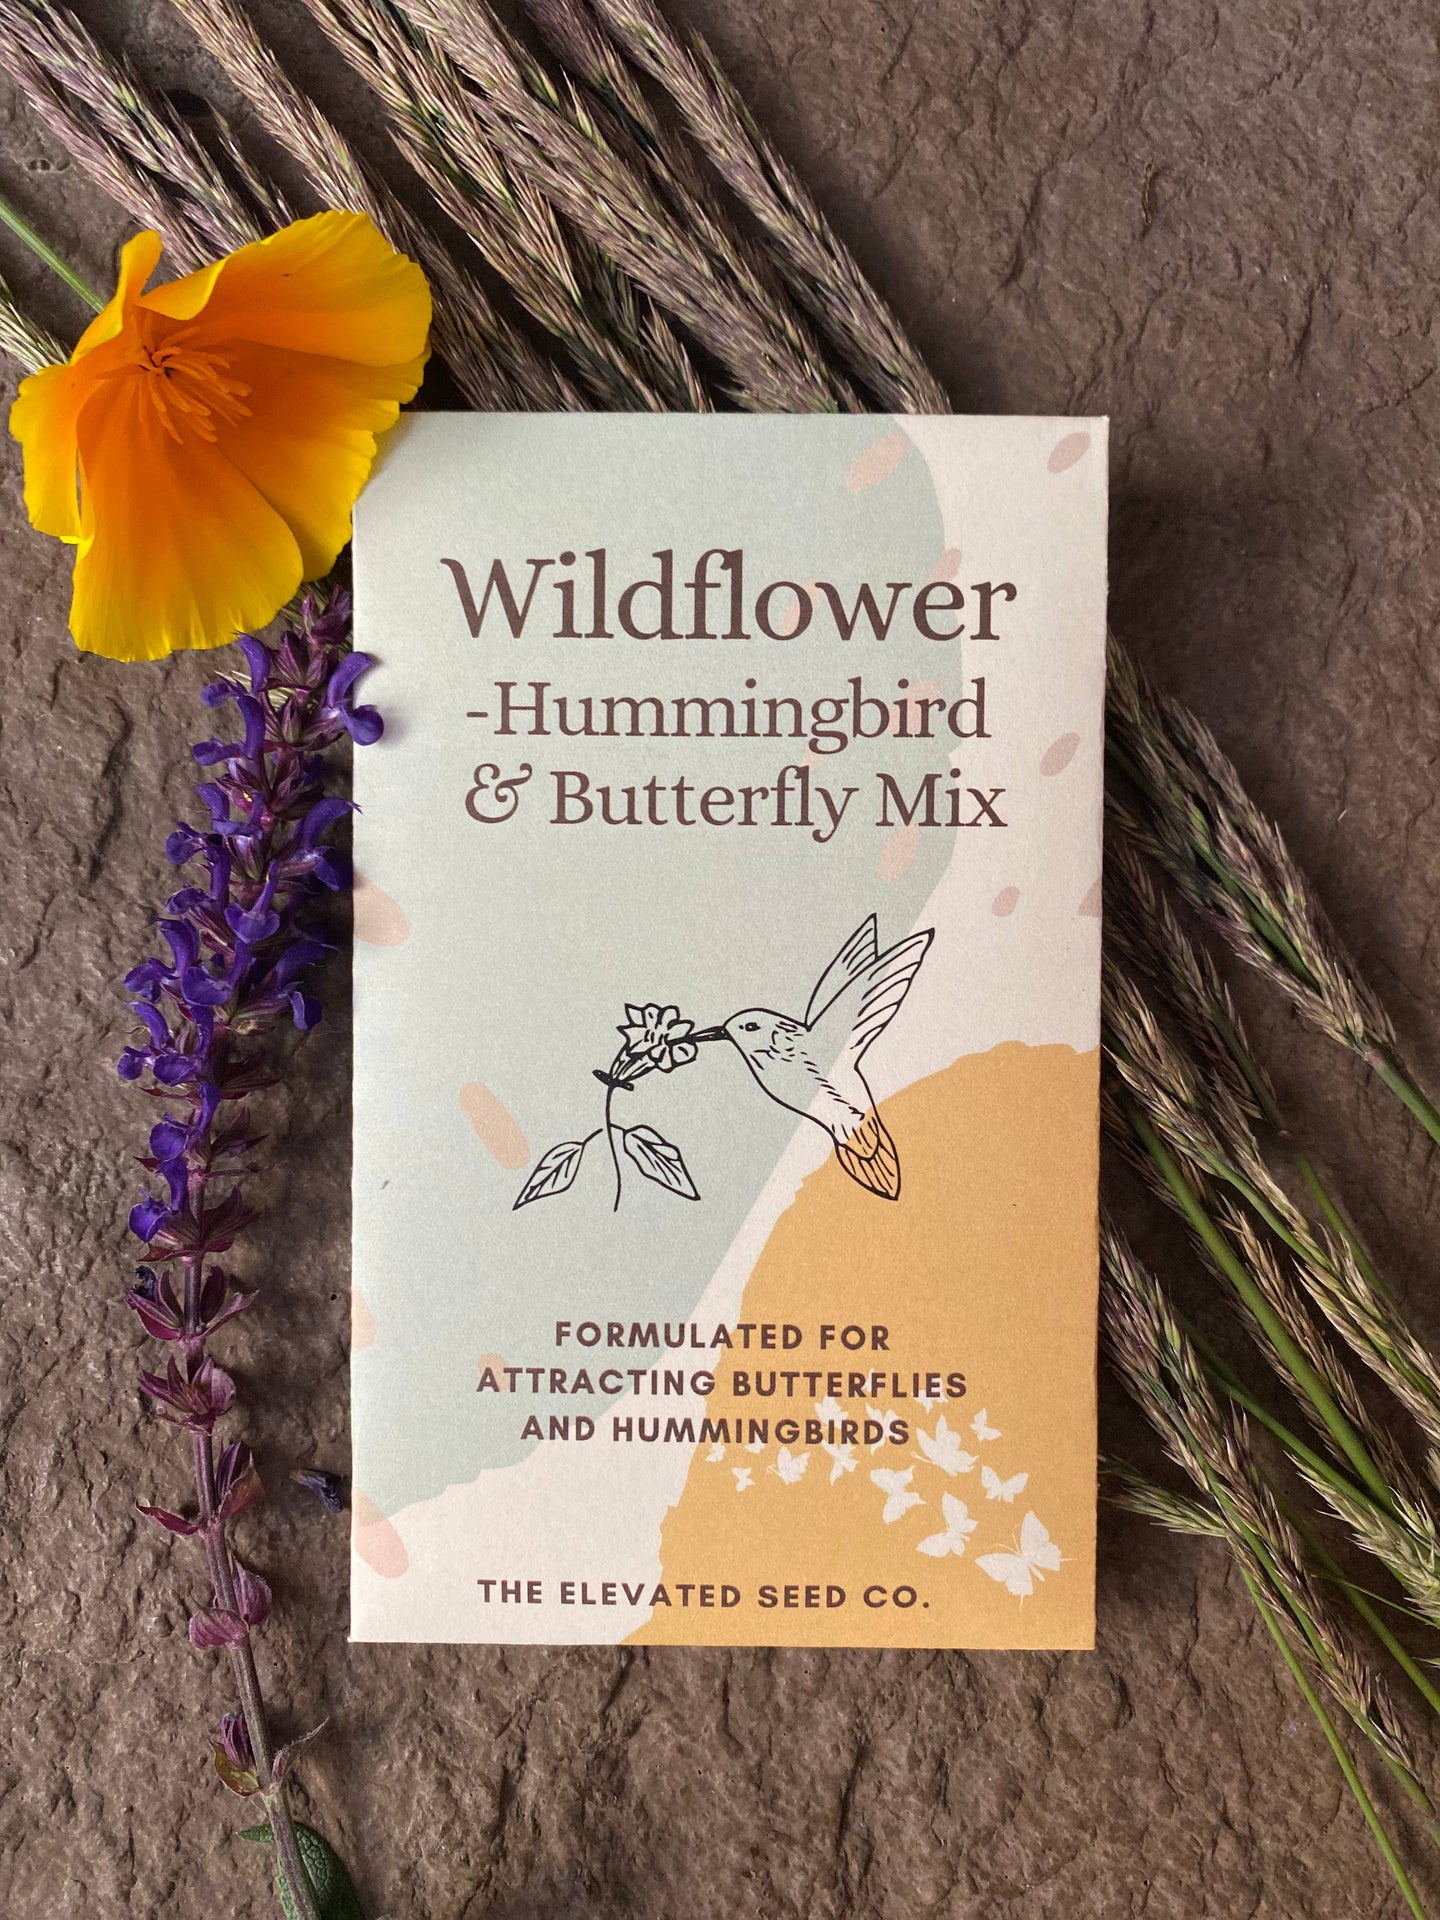 The Elevated Seed Co. - Wild Flower Garden Seed Mix- Hummingbird & Butterfly